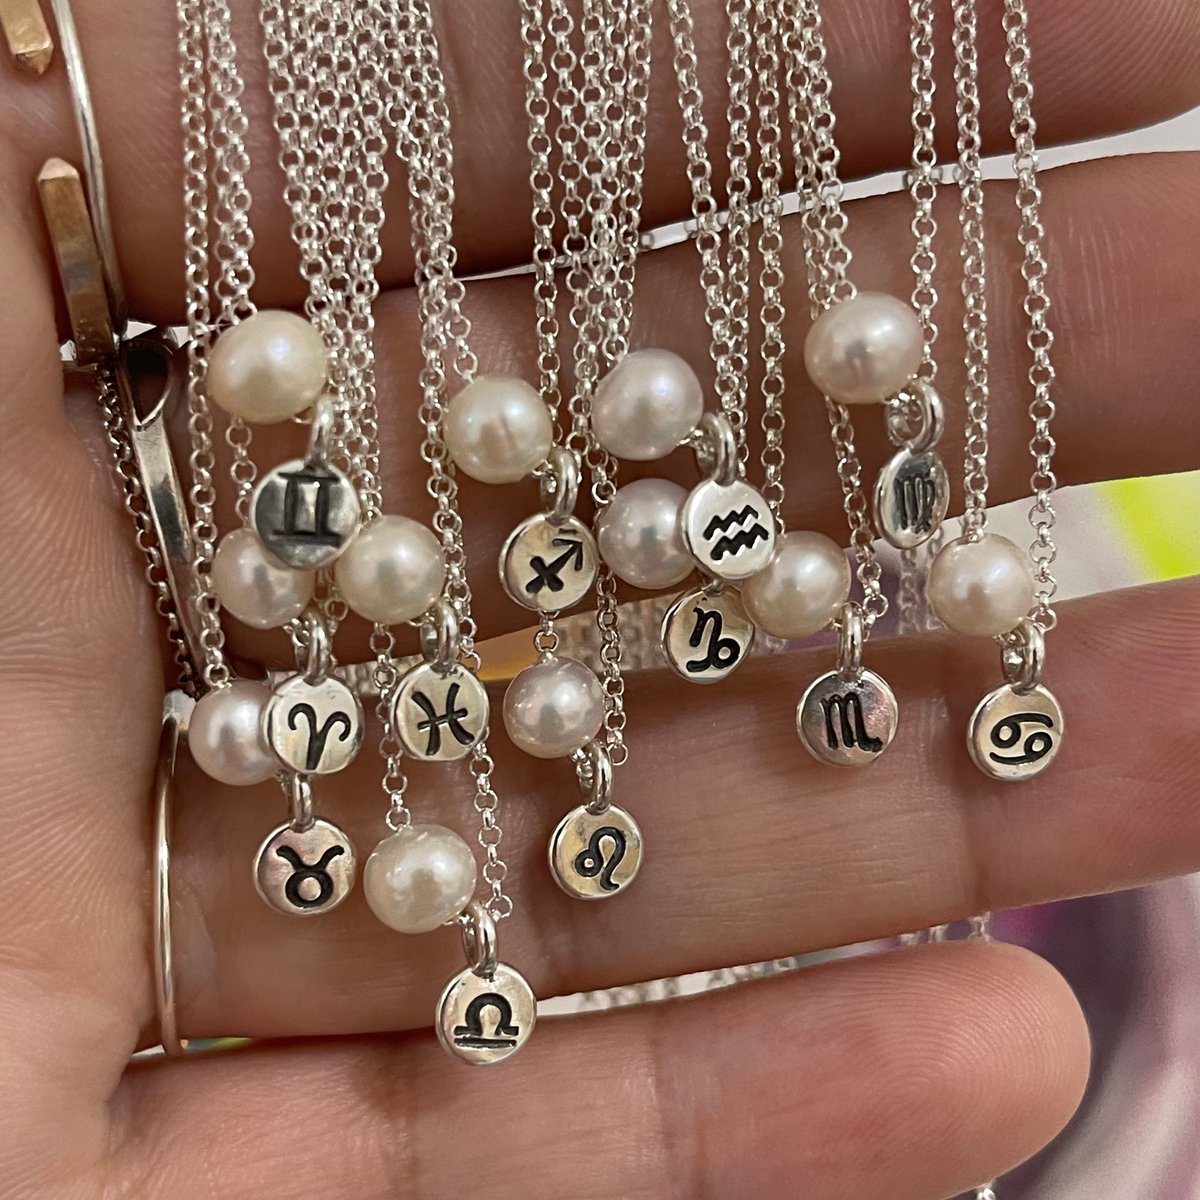 Image of zodiac sign and pearl necklace